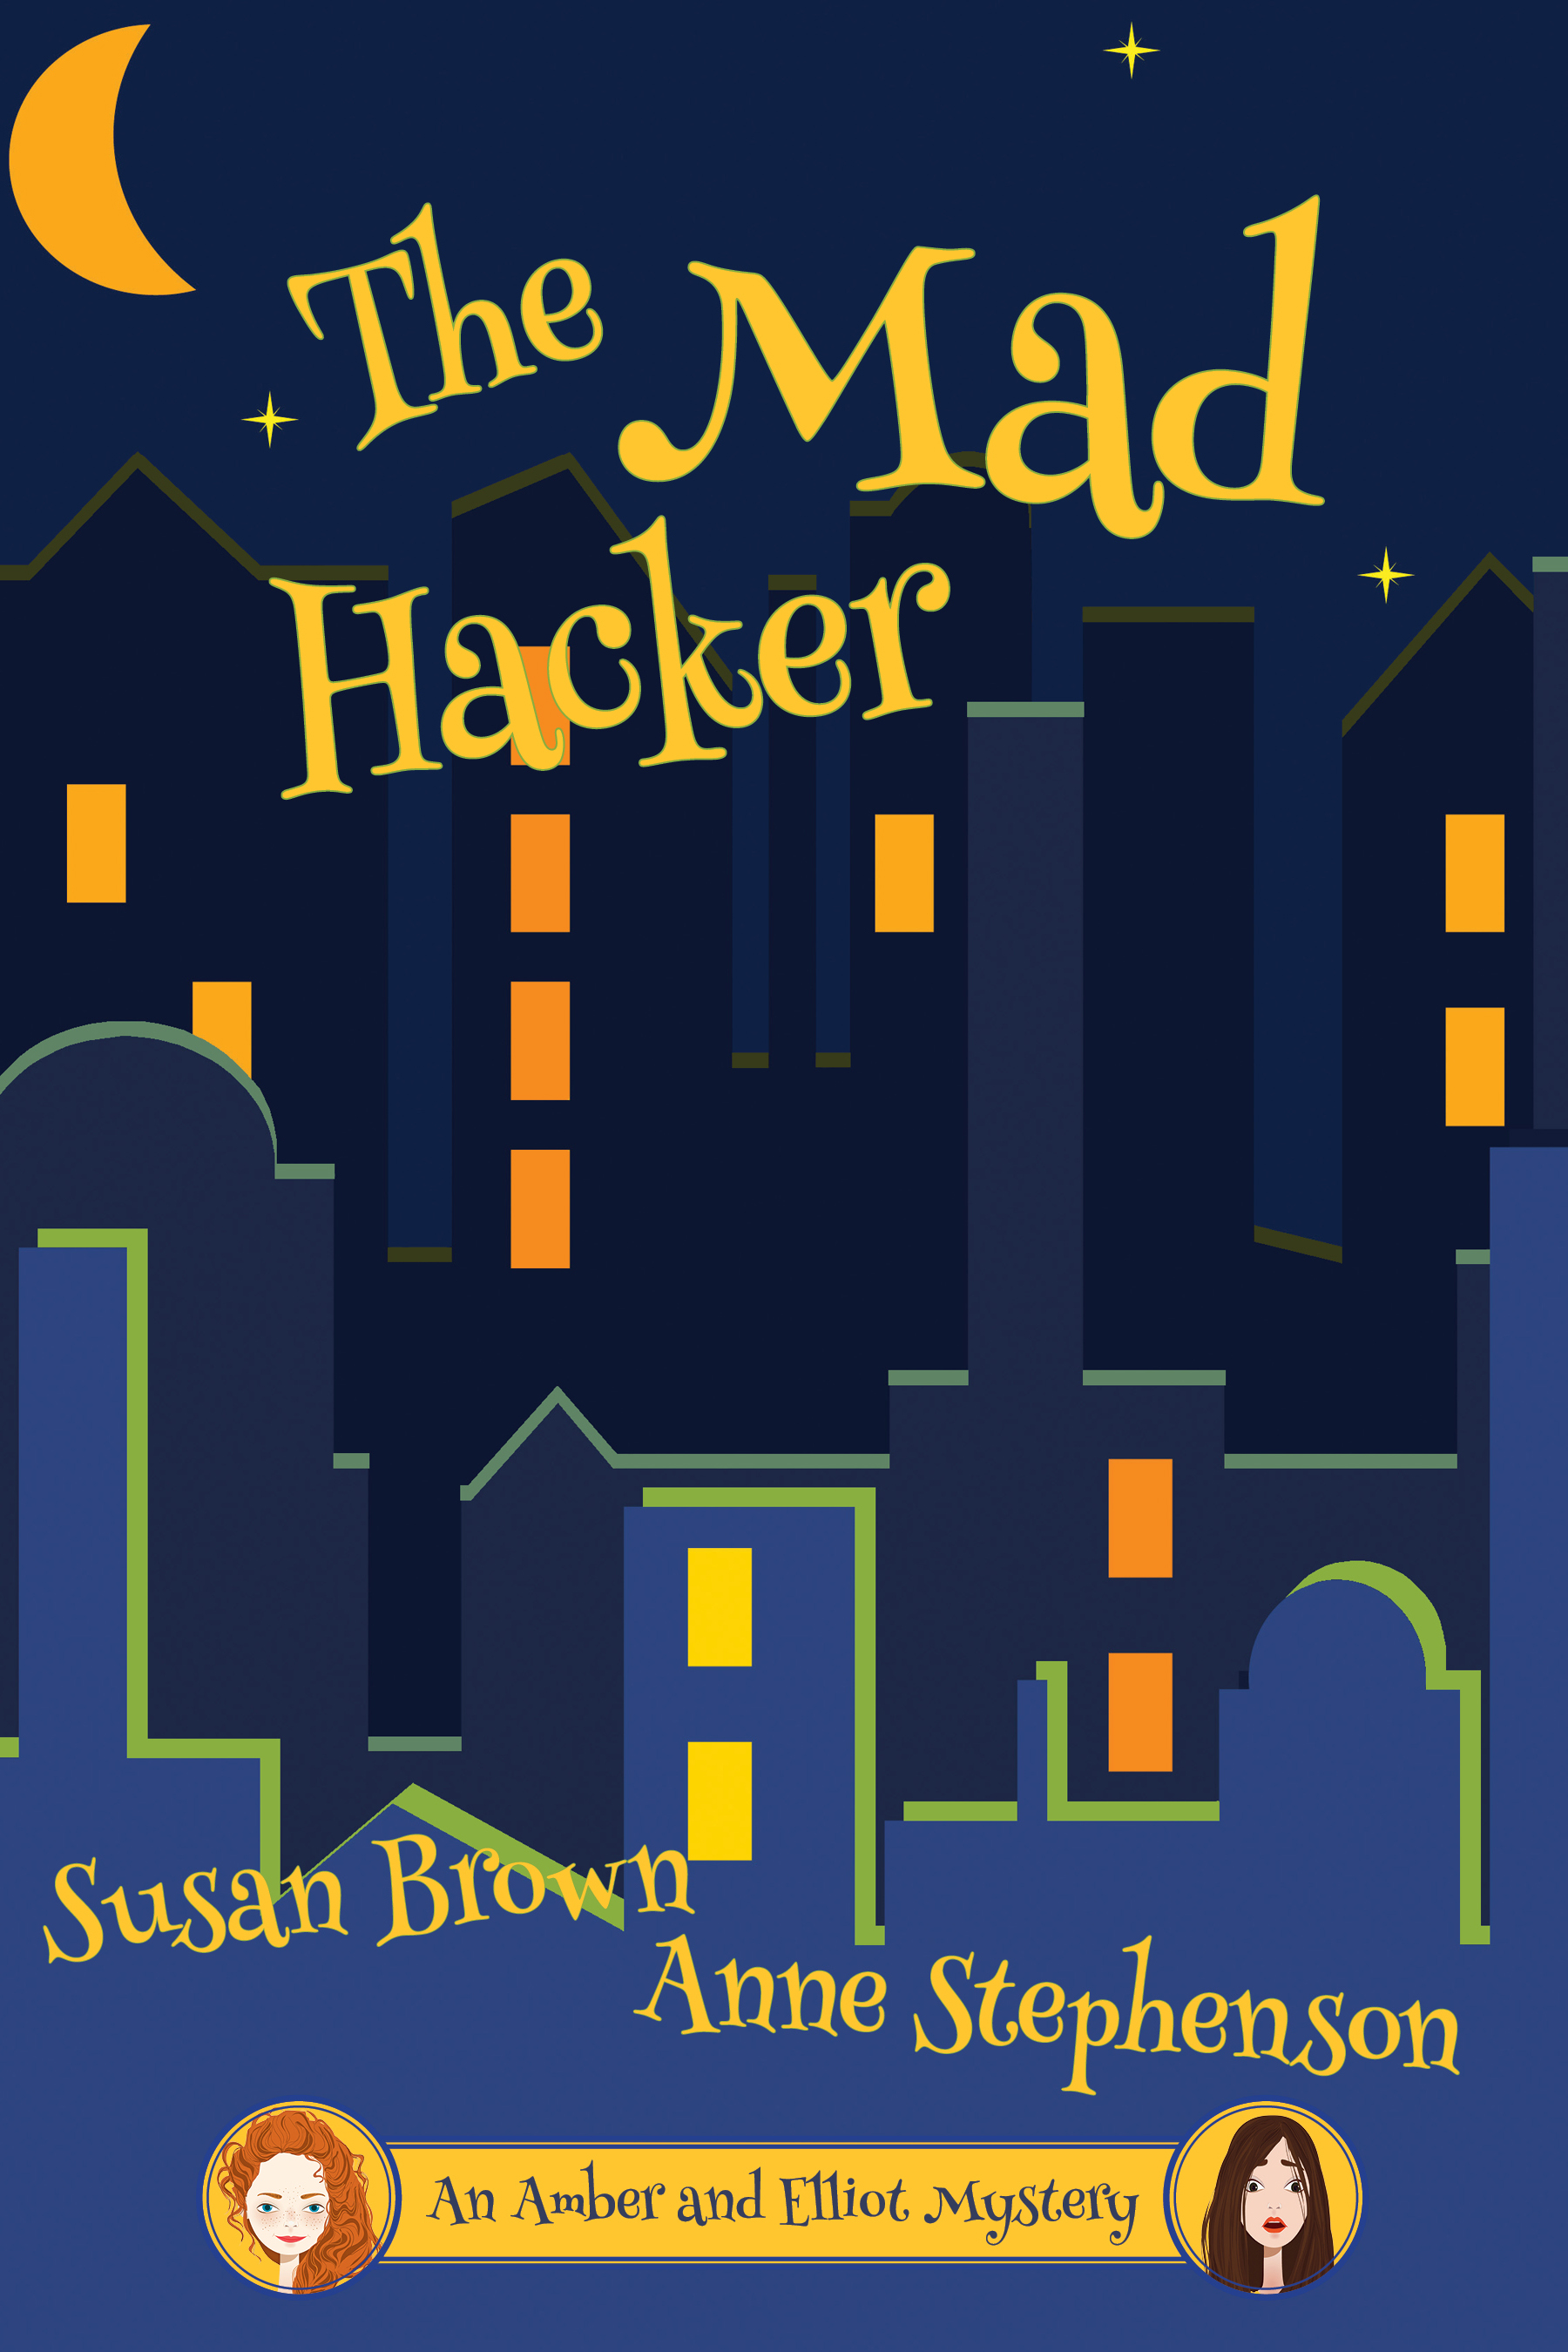 The Mad Hacker by Susan Brown and Anne Stephenson